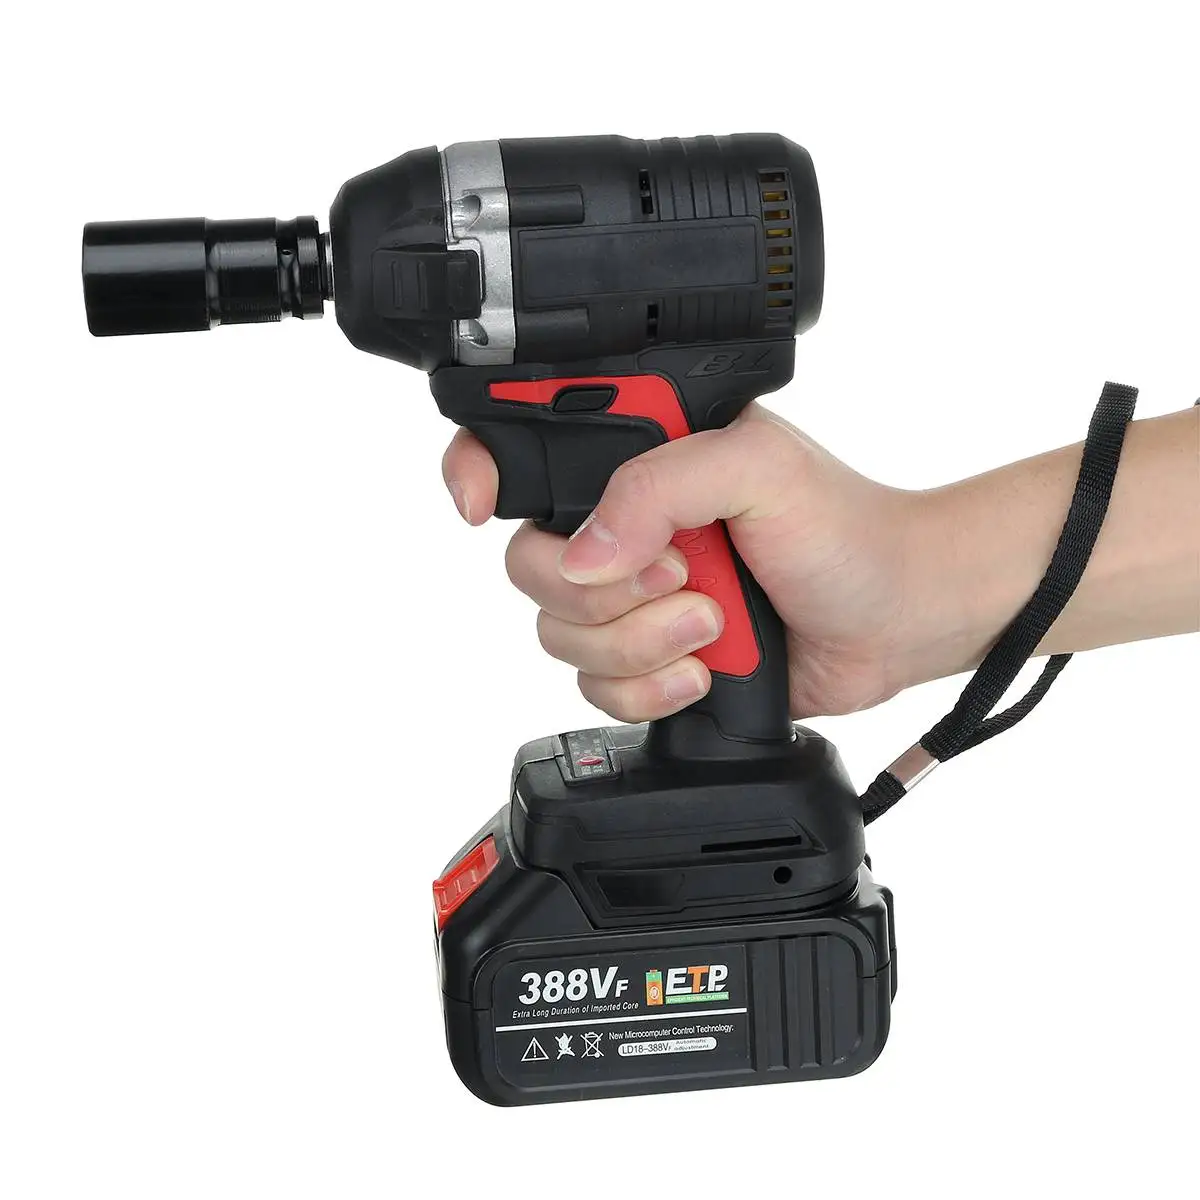 Hot Products! 388V Brushless Cordless Electric Impact Wrench Screwdriver Electric Wrench 19800mAh 630N.M Power Tools for 18V Makita Battery